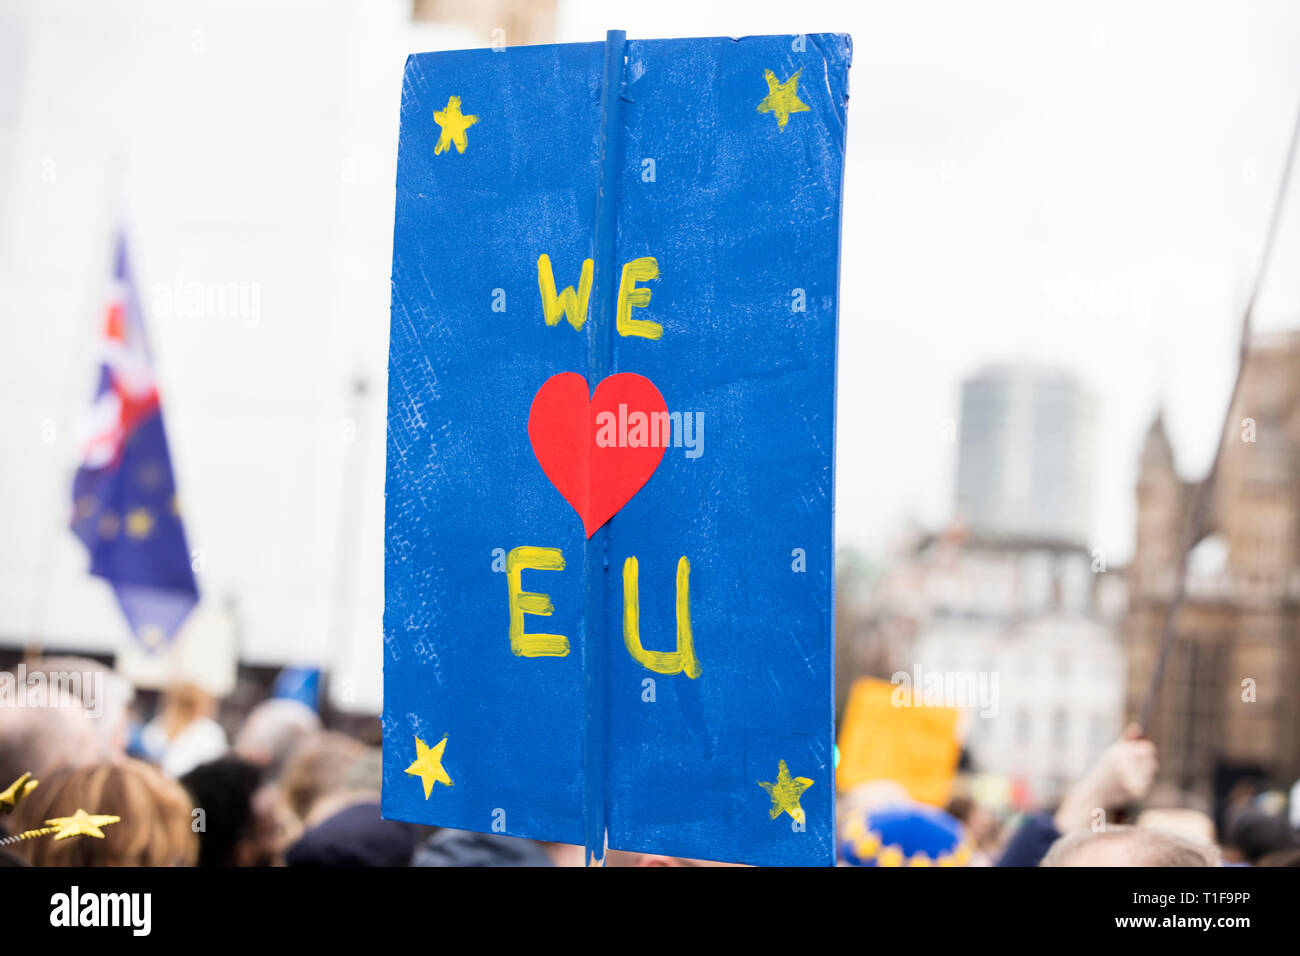 We love Europe, pro European brexit sign at a political protest Stock Photo